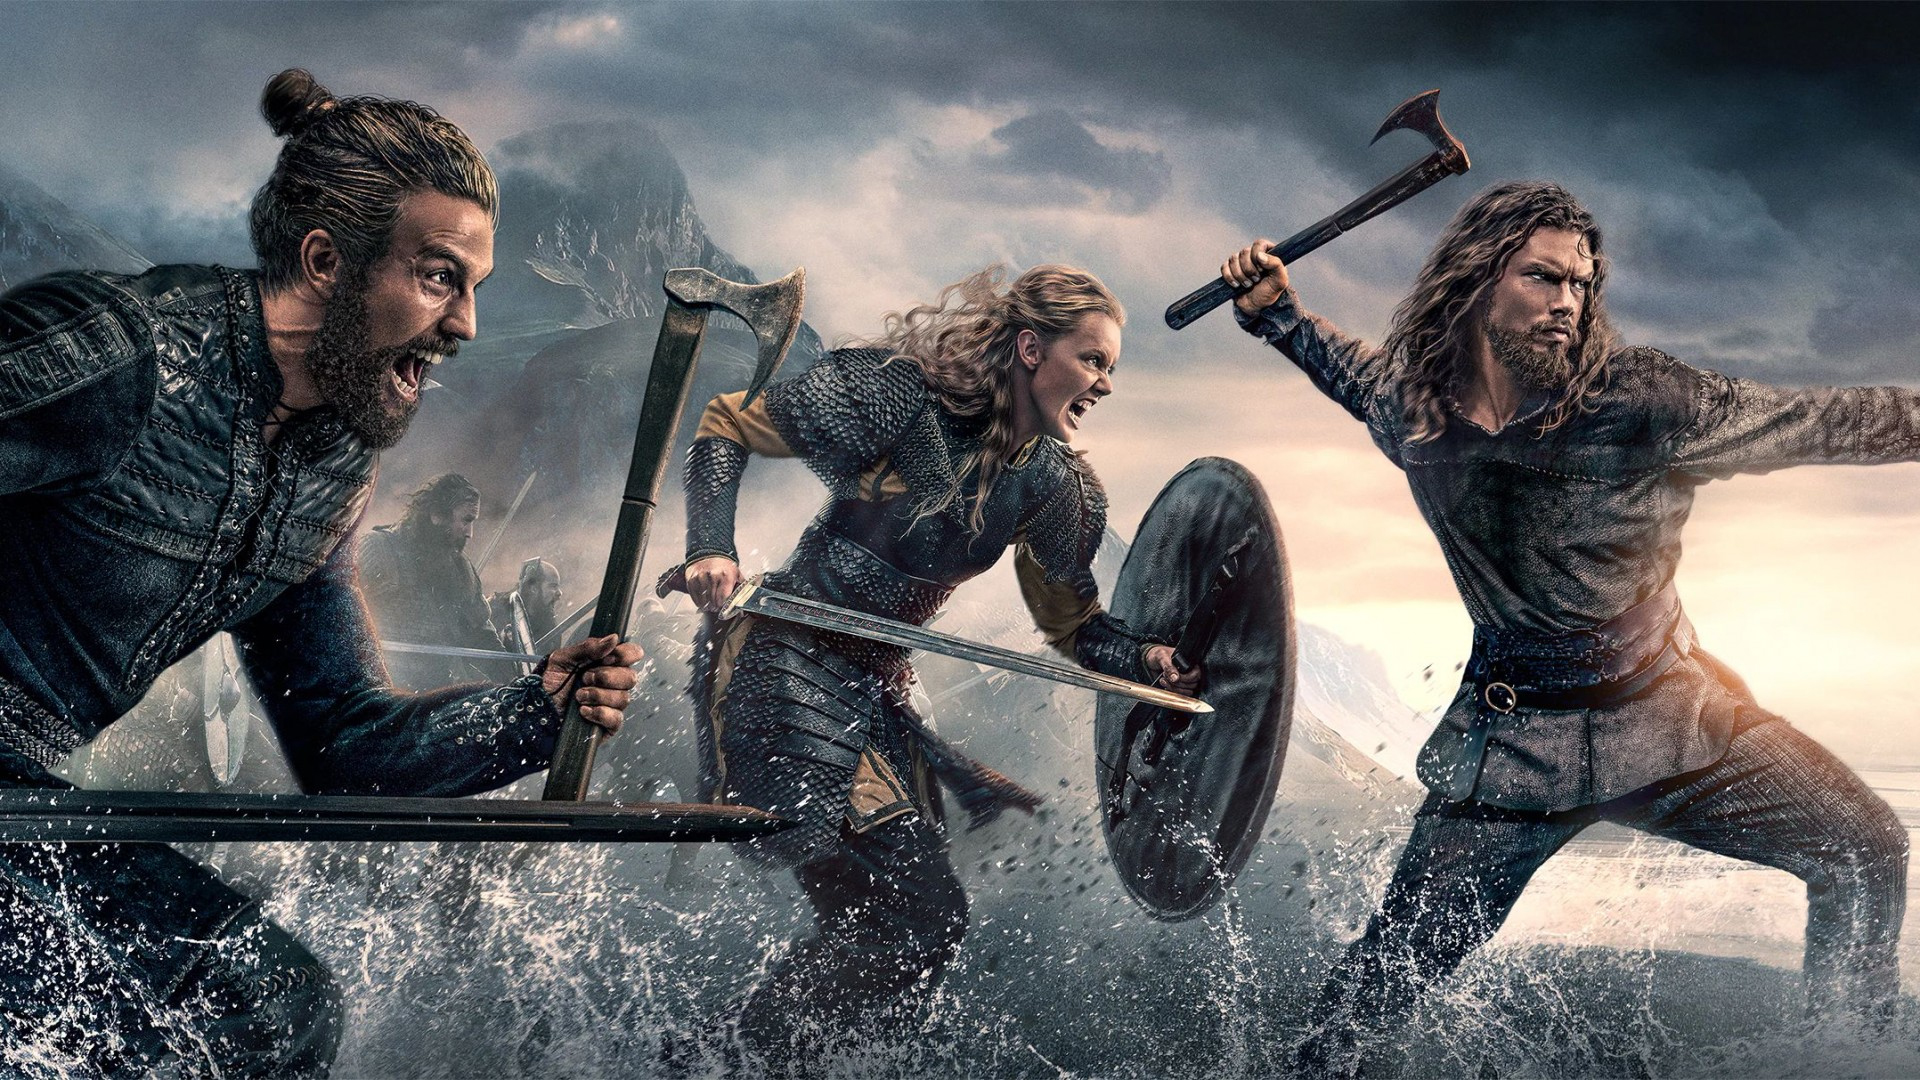 Vikings Best Episodes: What to Watch Before Netflix's Vikings: Valhalla